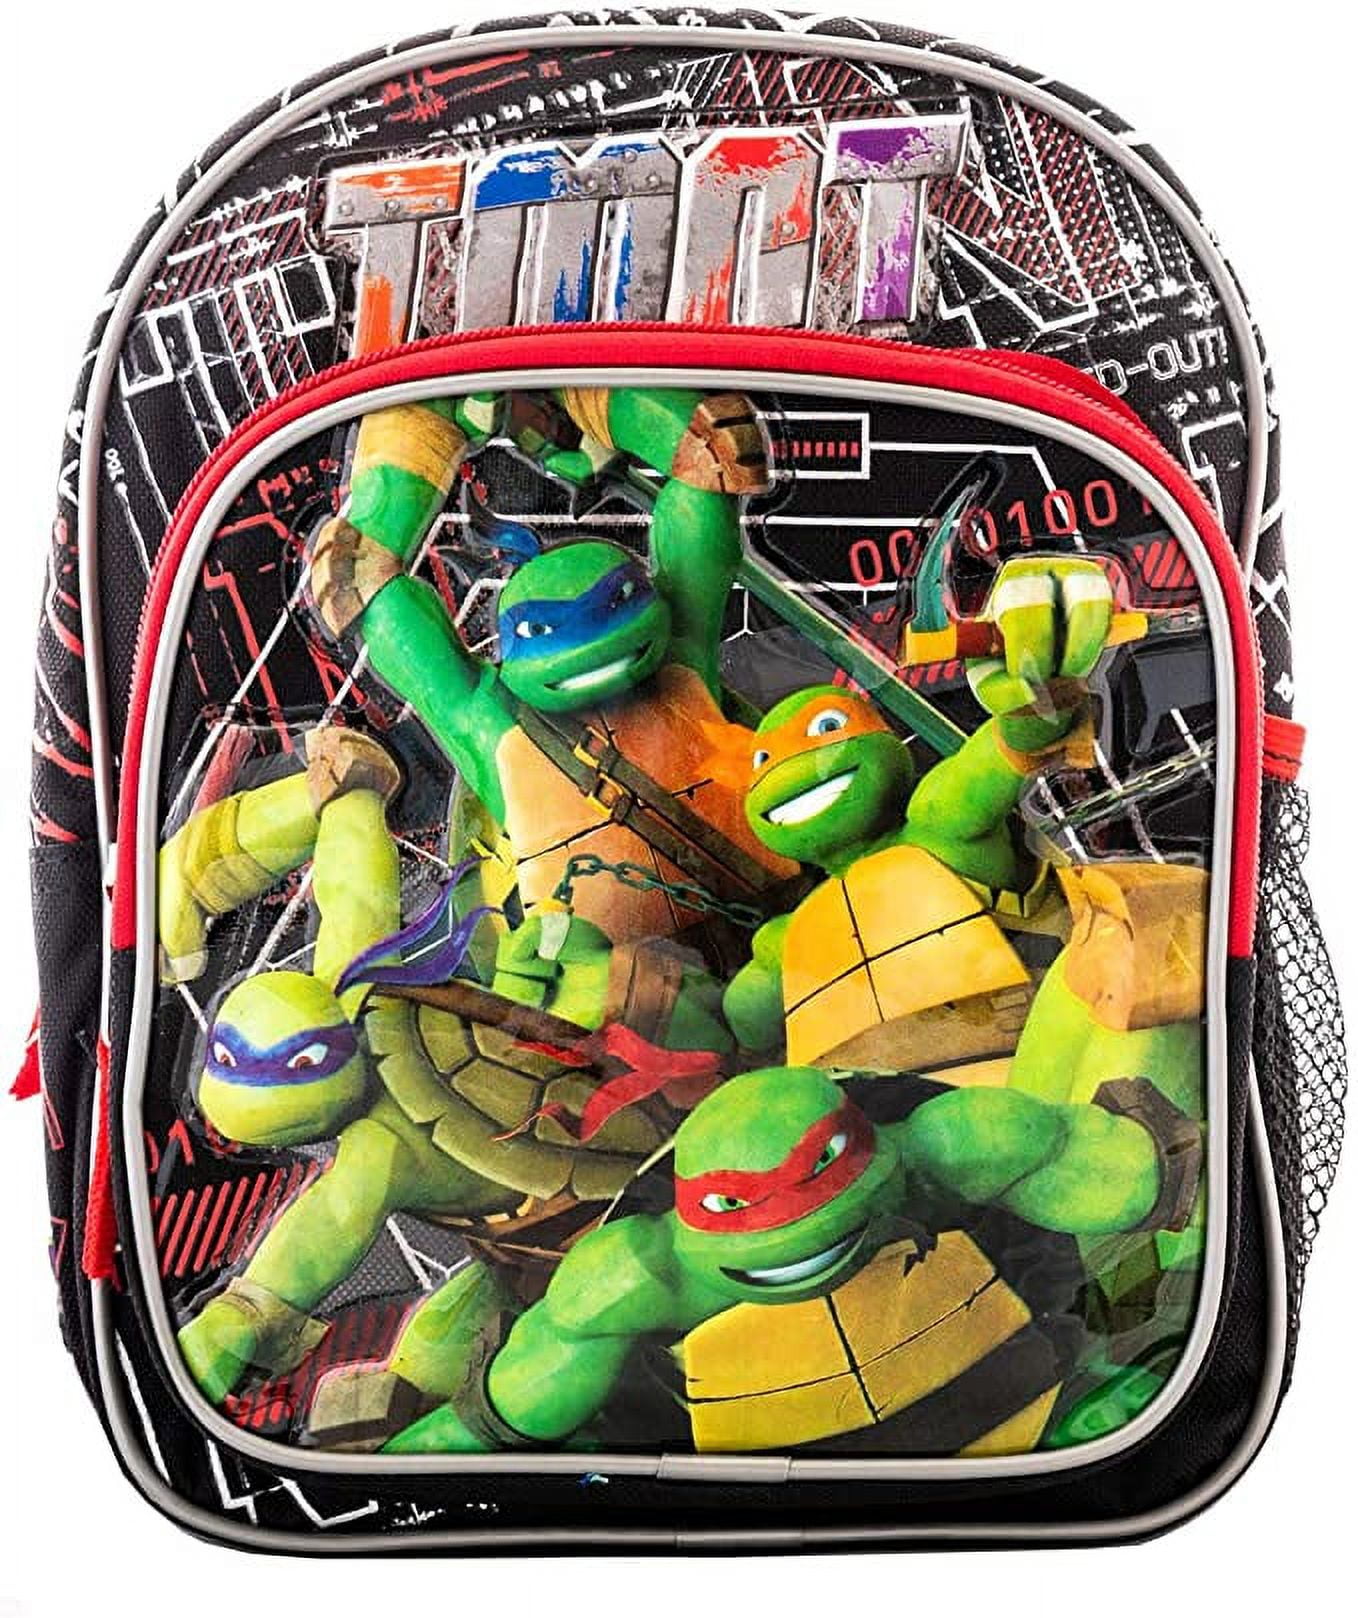 Bonggamom Finds: School lunches are easy and fun with Glad's Designer  Series TMNT Mini Rounds